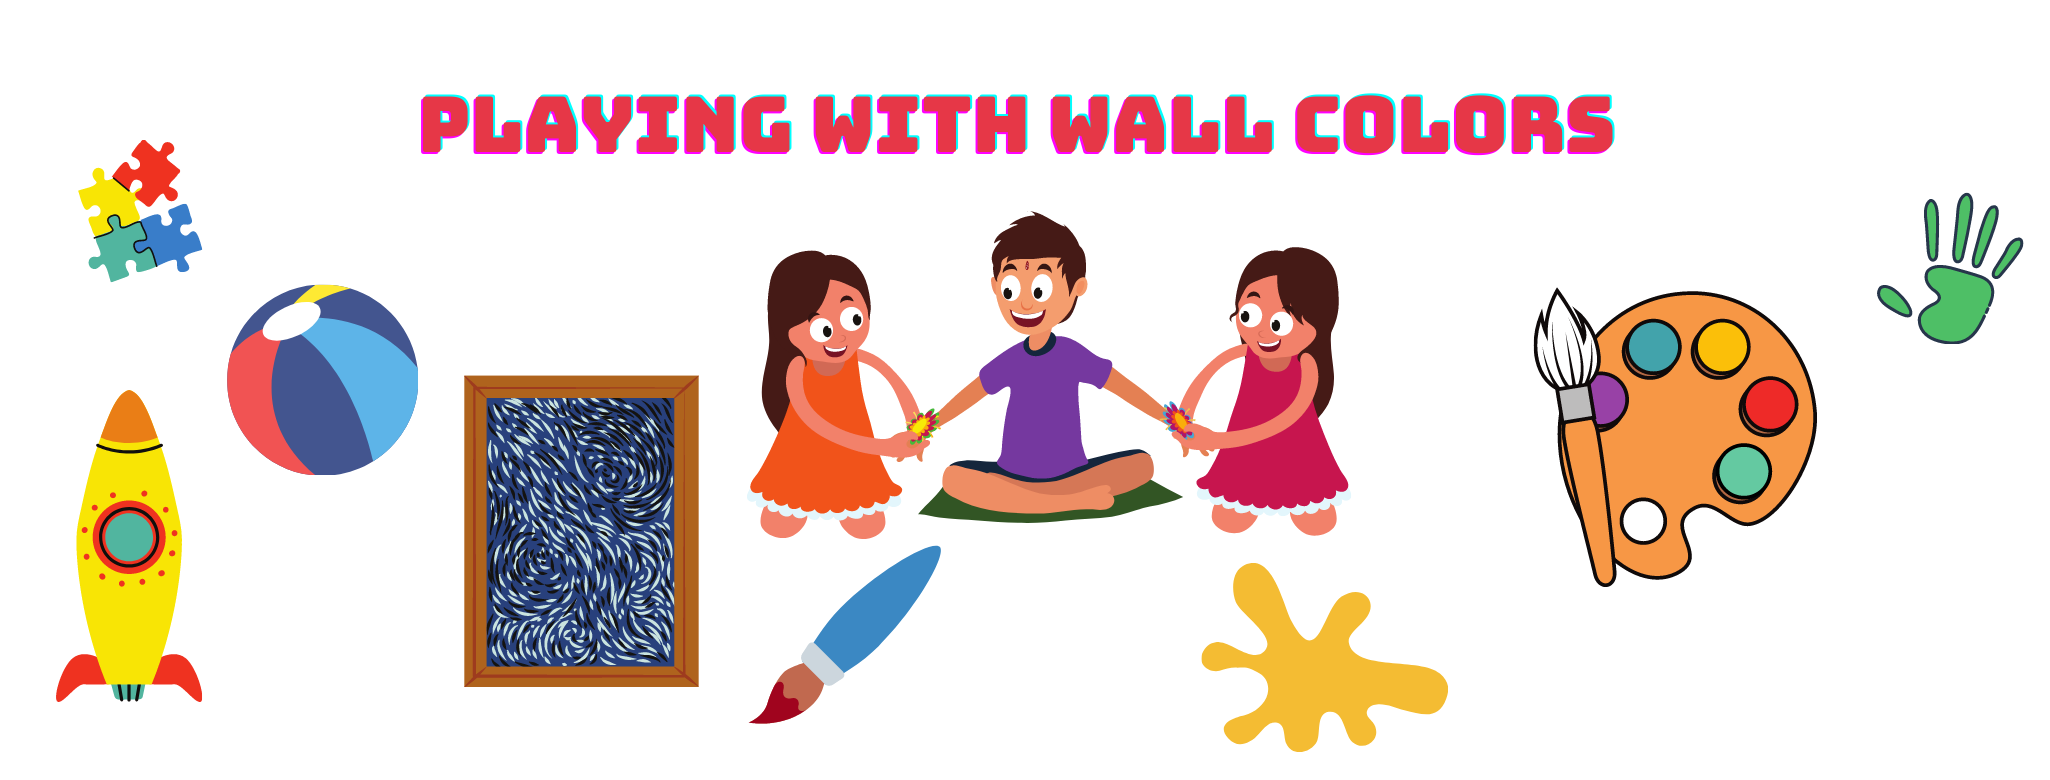 Playing with wall color for therapy for kids